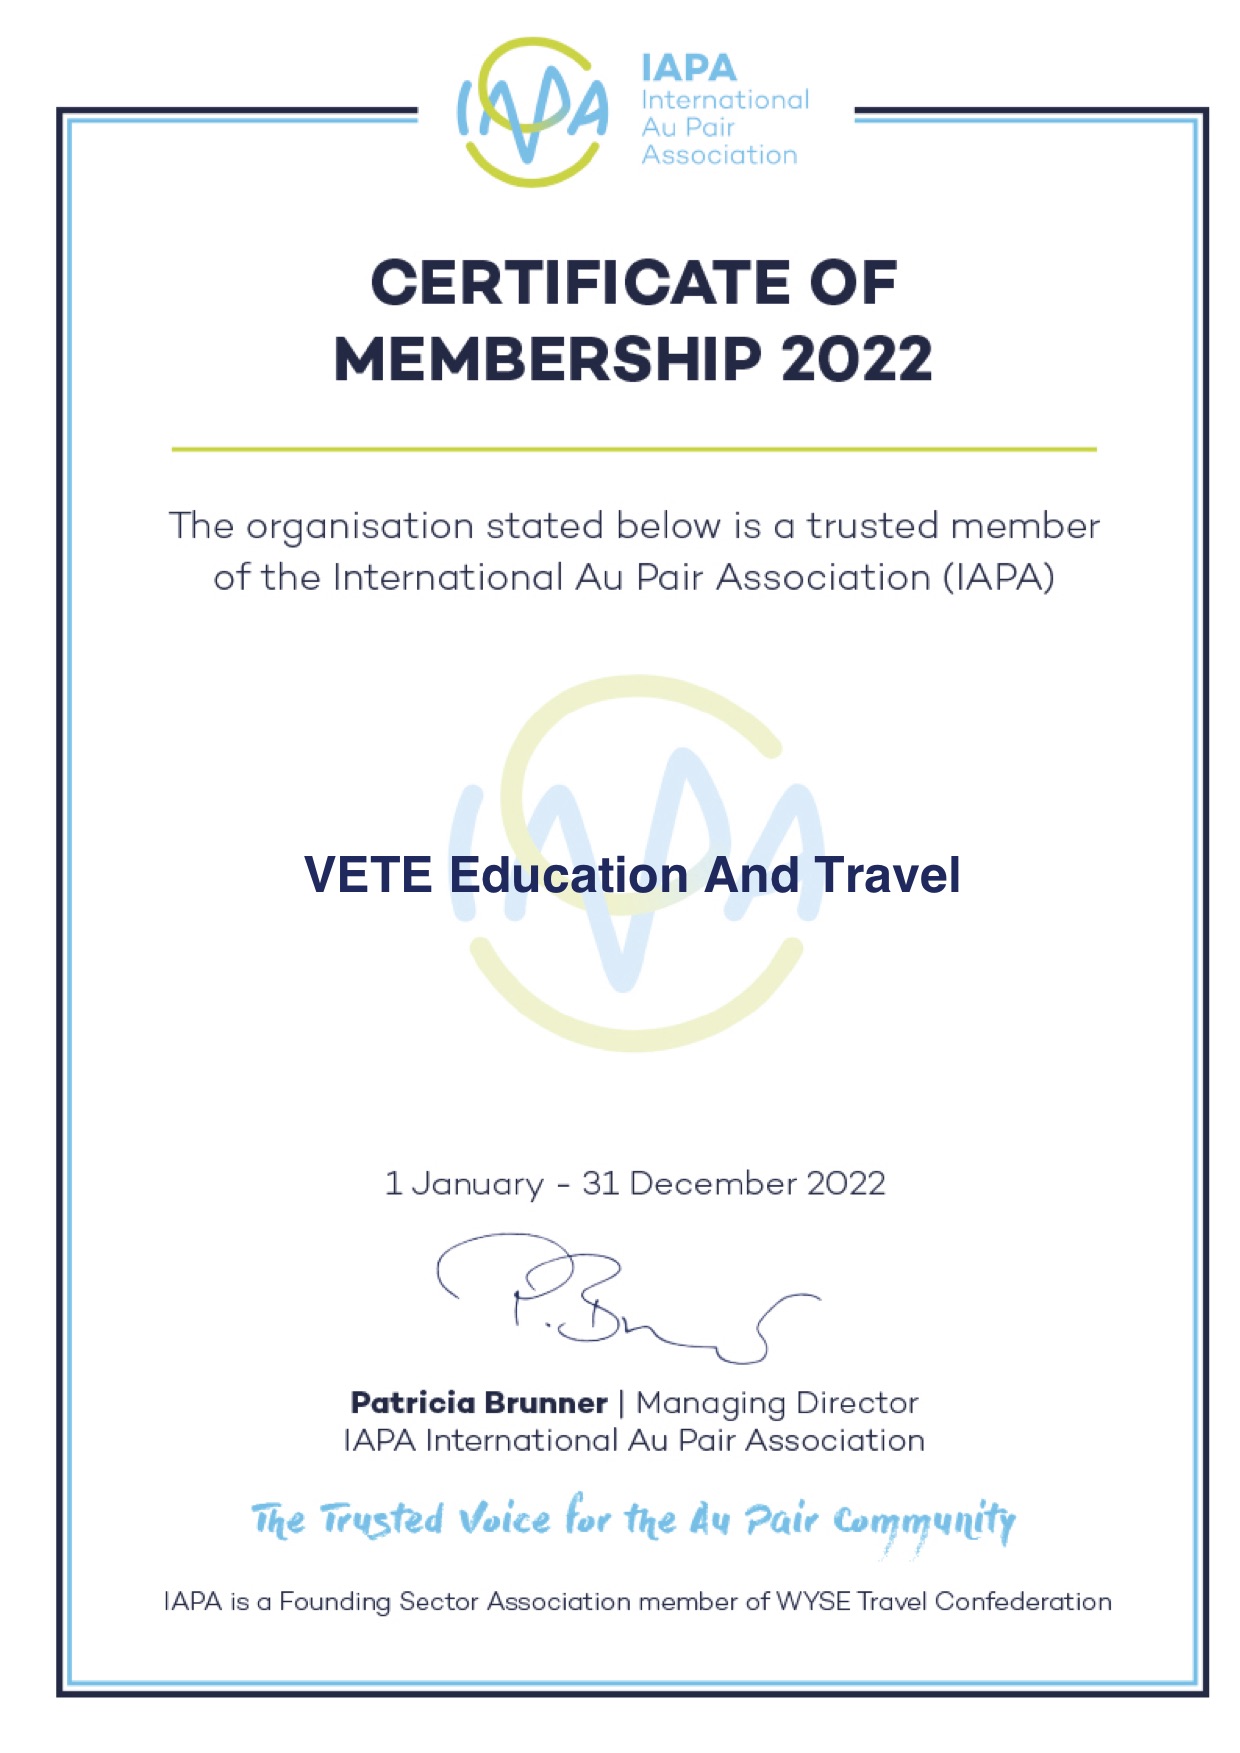 VETE-Education-And-Travel